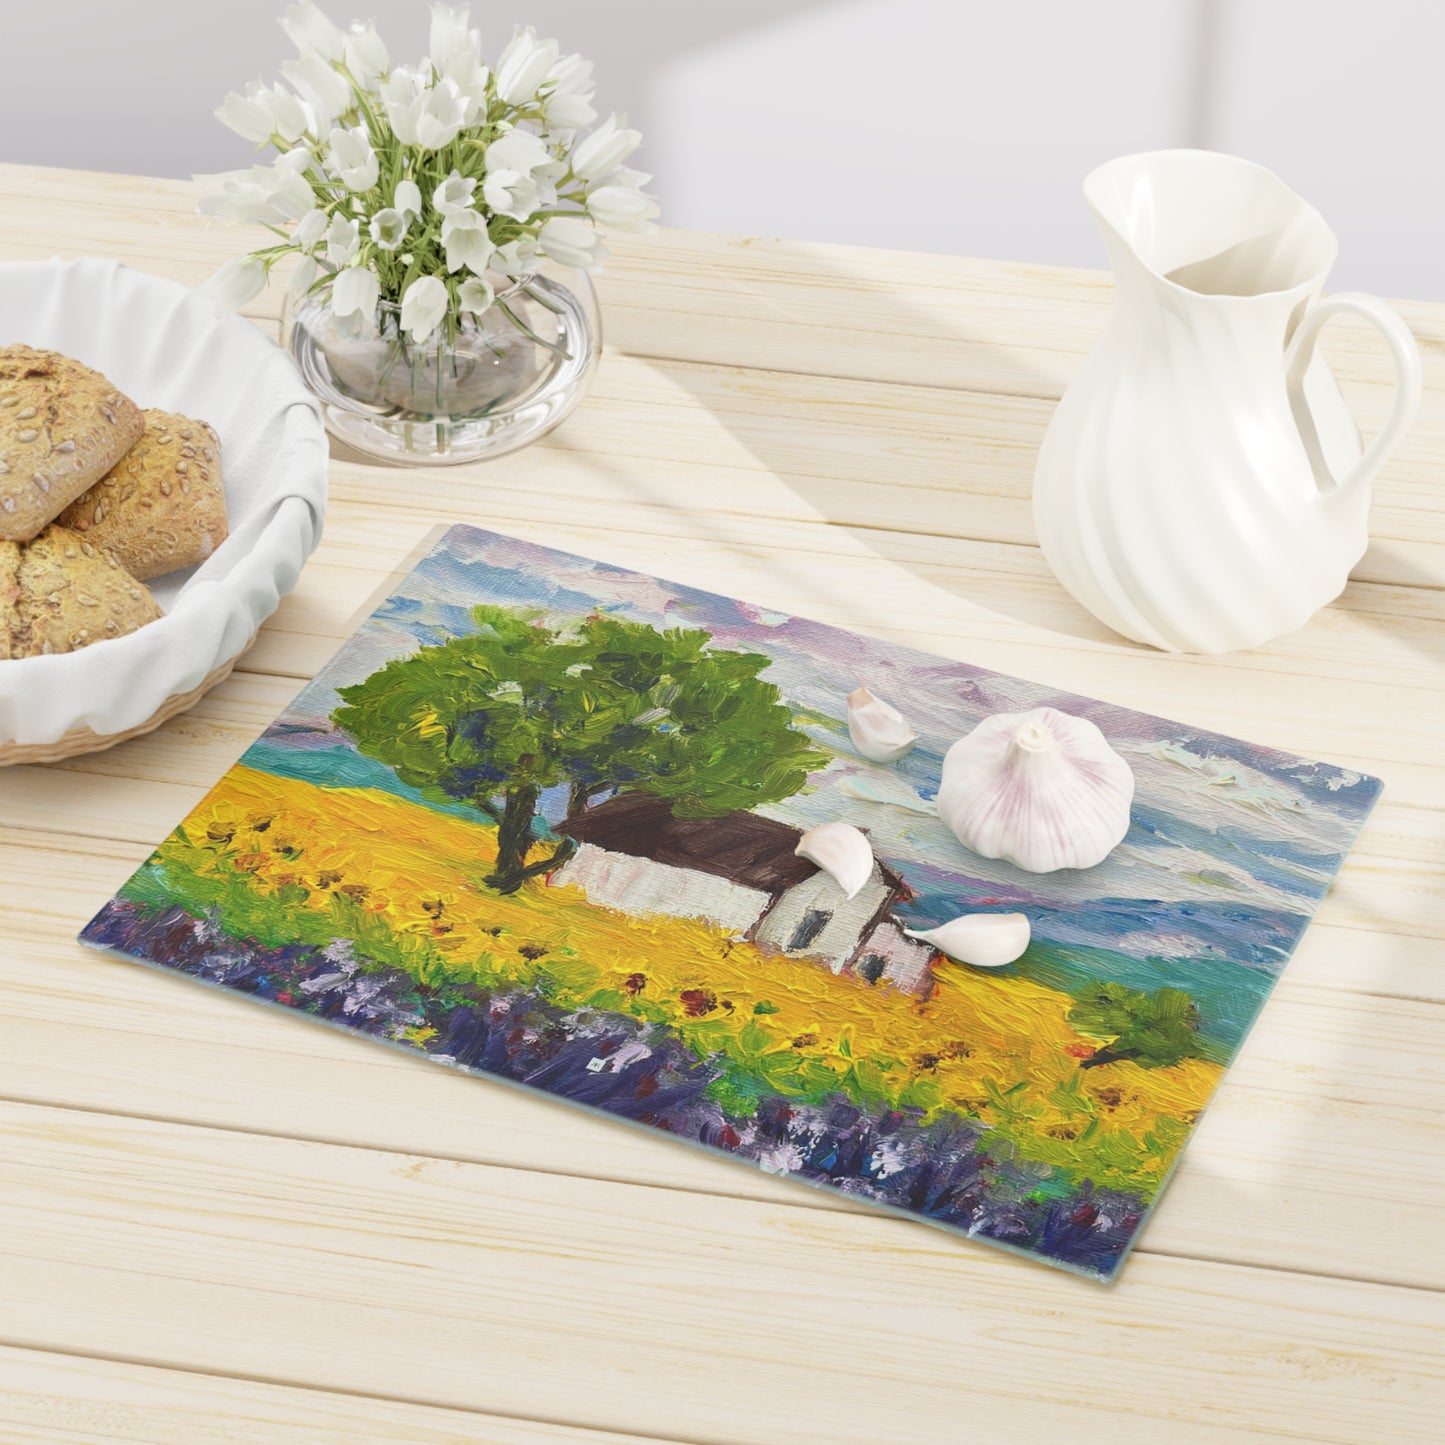 Sunflowers and Lavender Provincial Landscape Glass Cutting Board